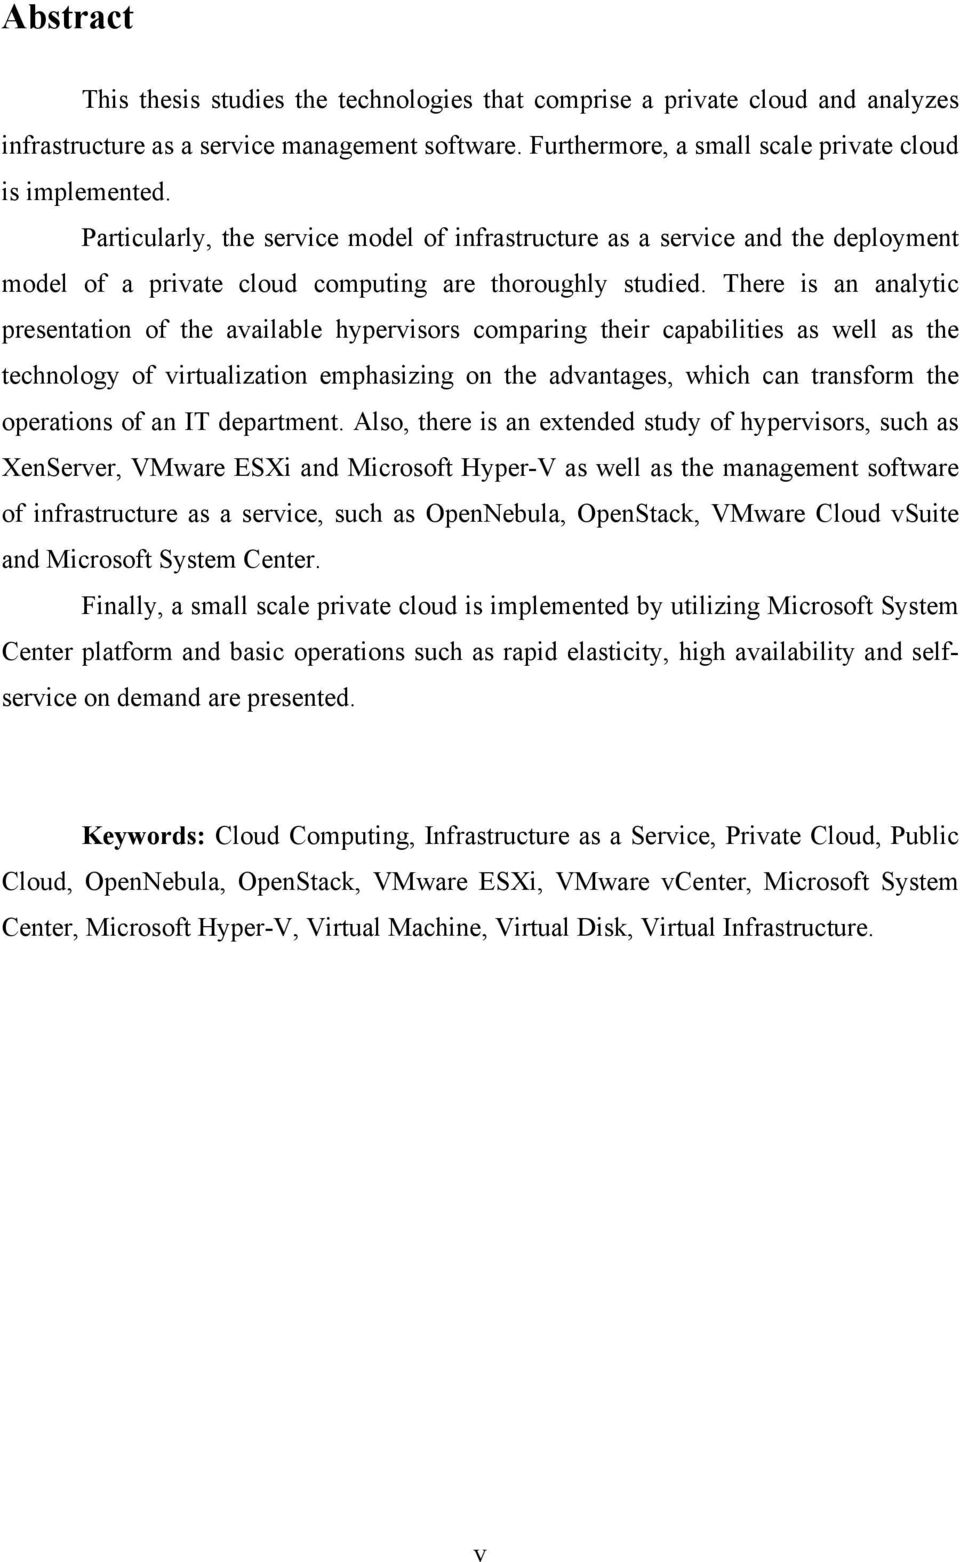 There is an analytic presentation of the available hypervisors comparing their capabilities as well as the technology of virtualization emphasizing on the advantages, which can transform the